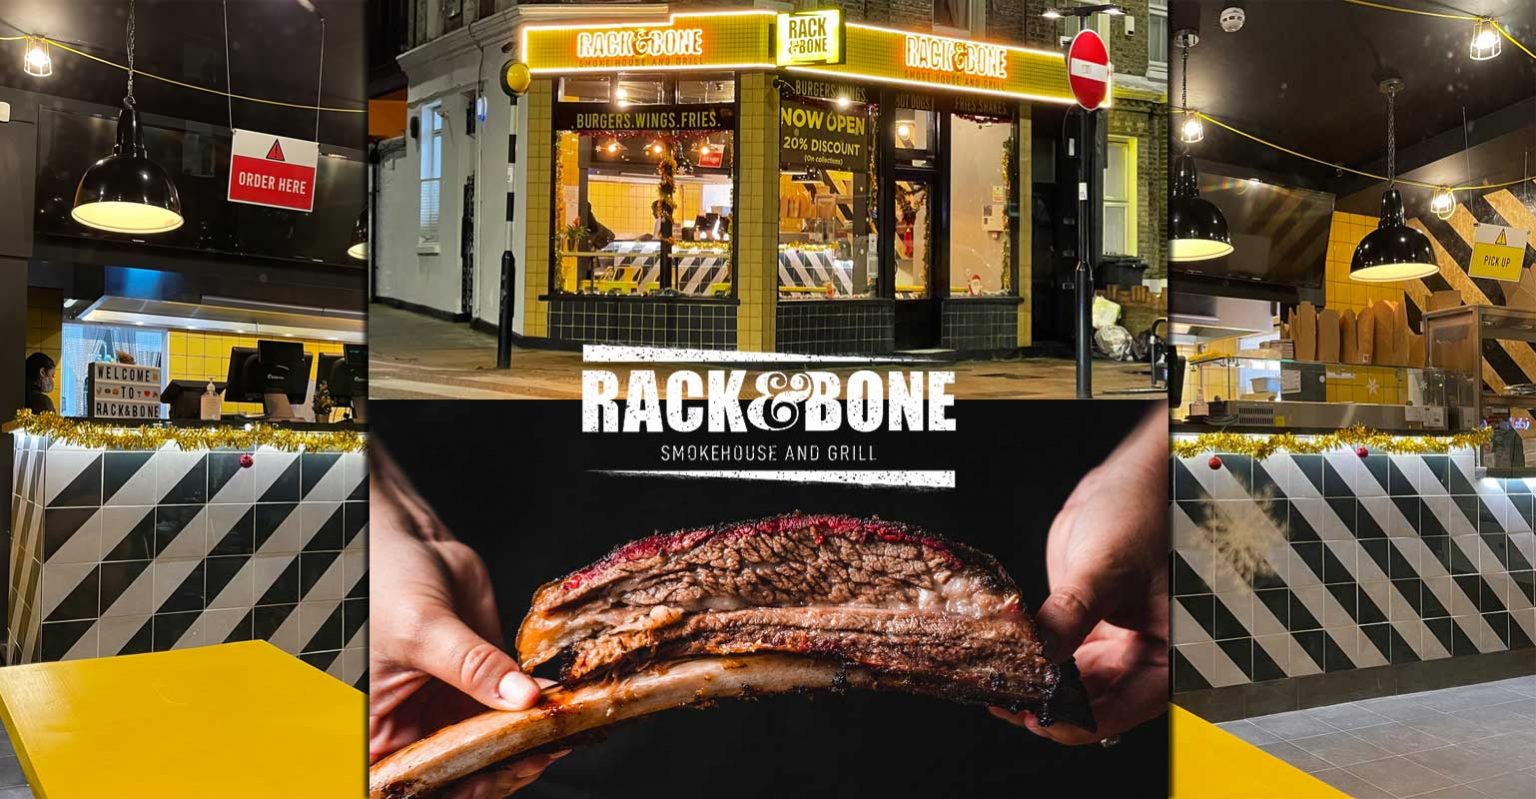 Rack & Bone smokehouse 'n' grill opens in London Holloway - Feed the Lion